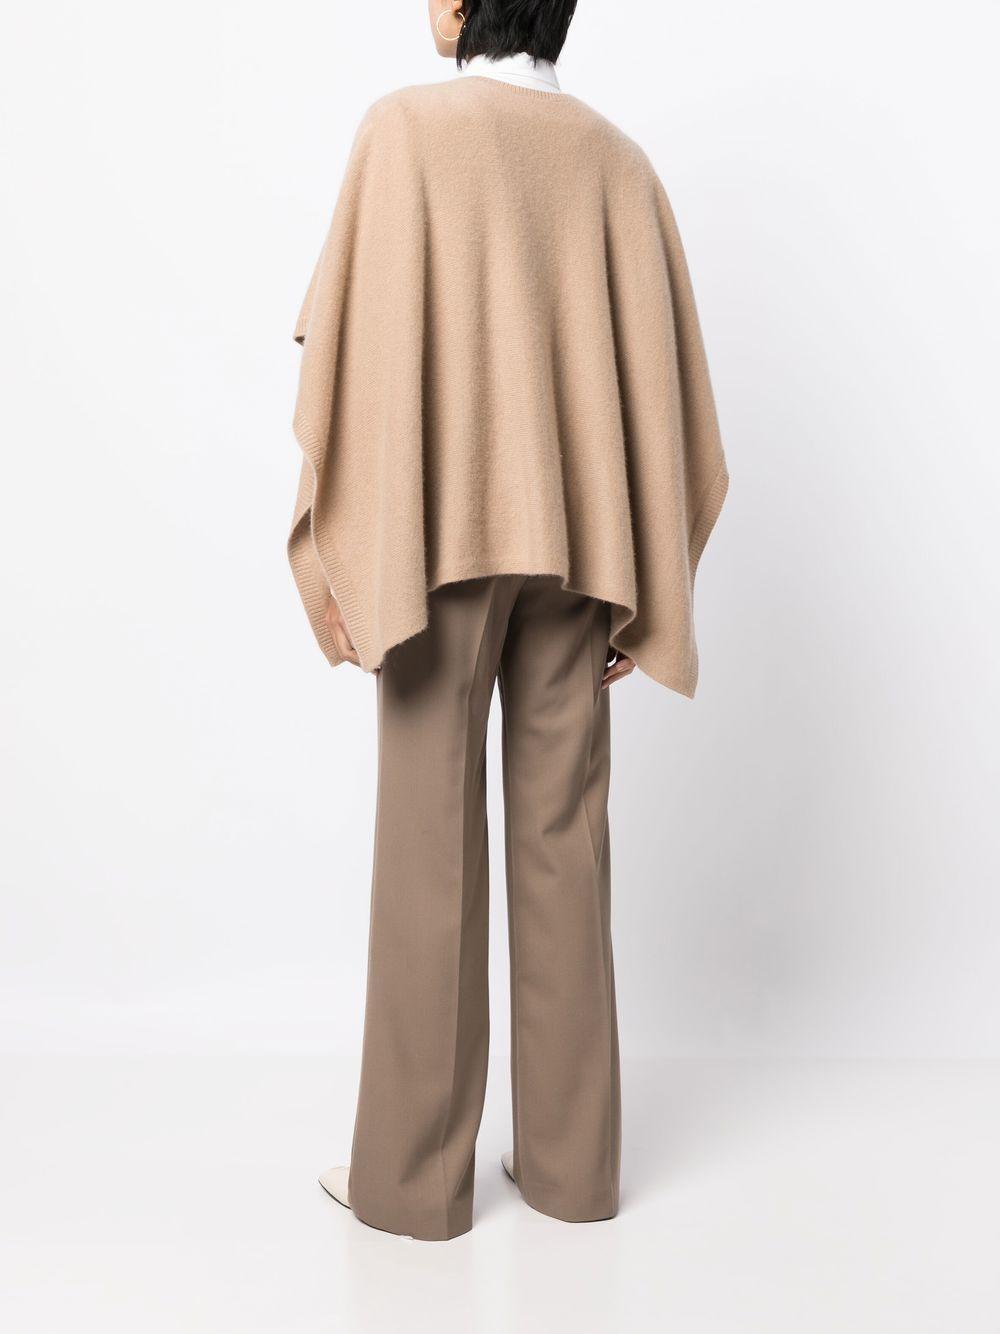 Vince Fine Knit Cashmere Poncho Jumper in Natural | Lyst